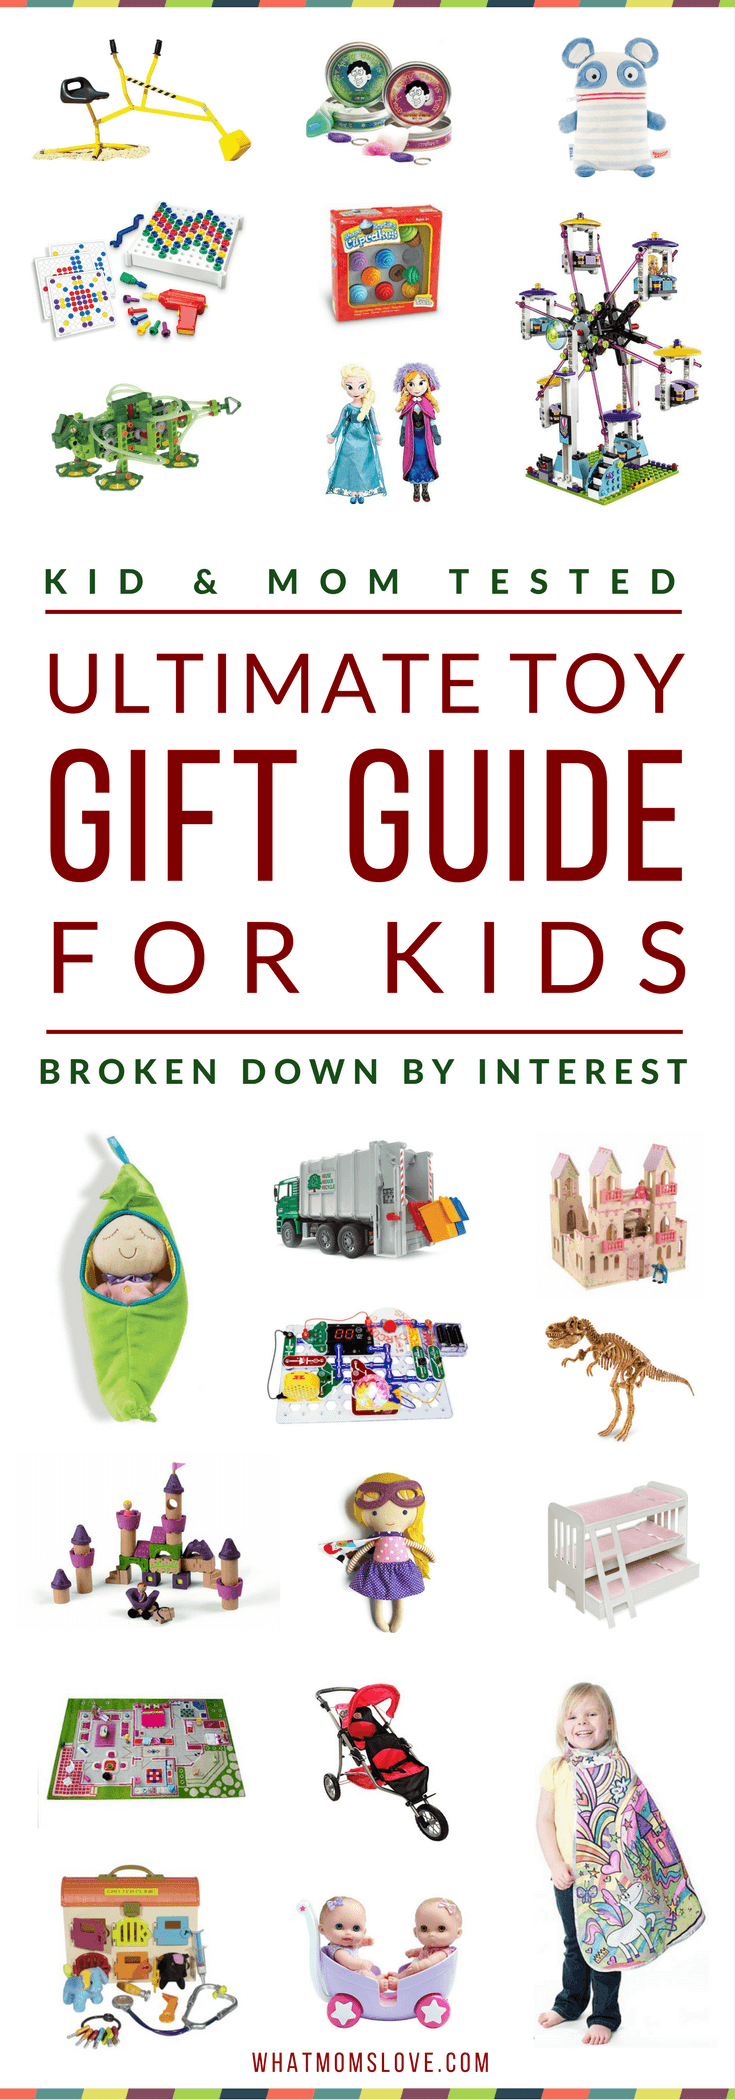 Best Toy Gift Guide For Kids - Holidays Birthdays